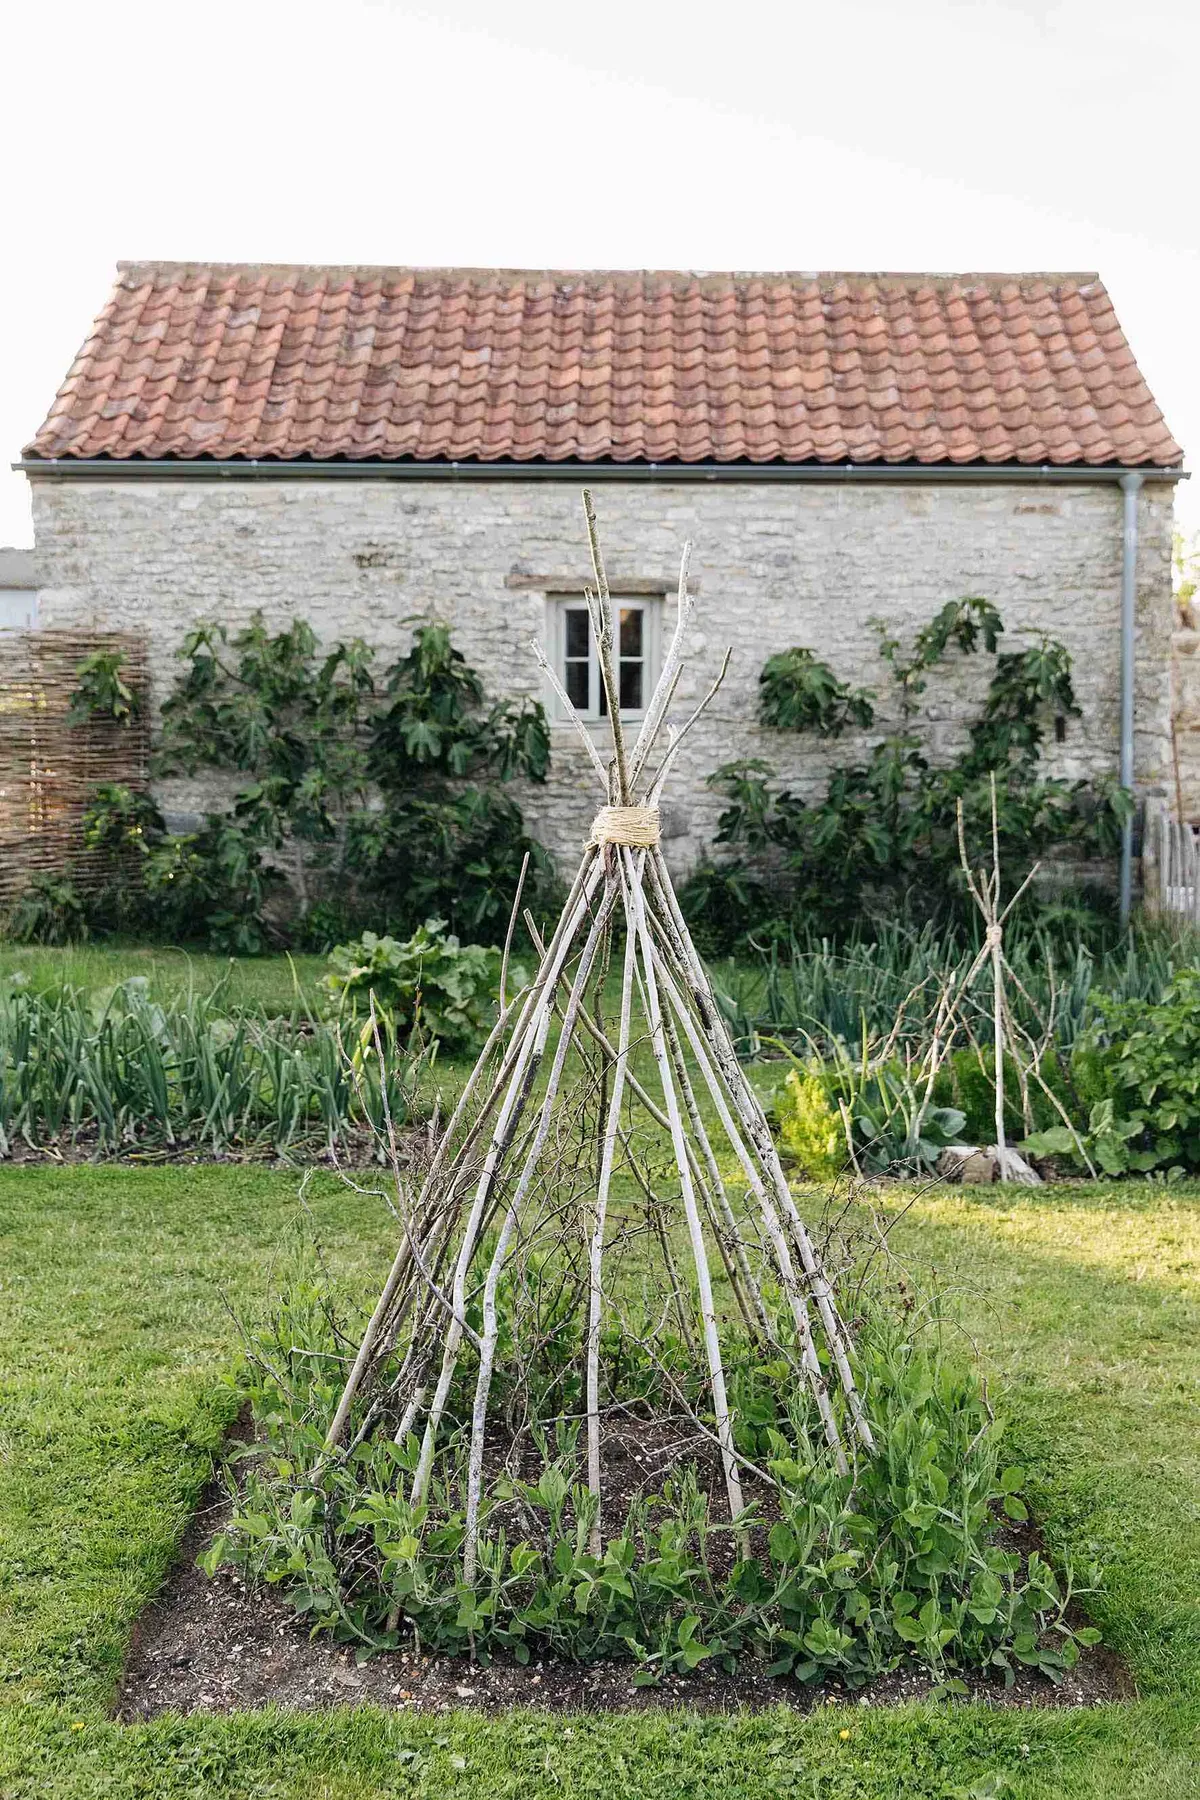 A plump teepee made by Louise from hazel pea sticks, collected from nearby woodland, supports sweet peas. Behind the teepee, figs are trained against the south-facing wall of the Farrowing House.